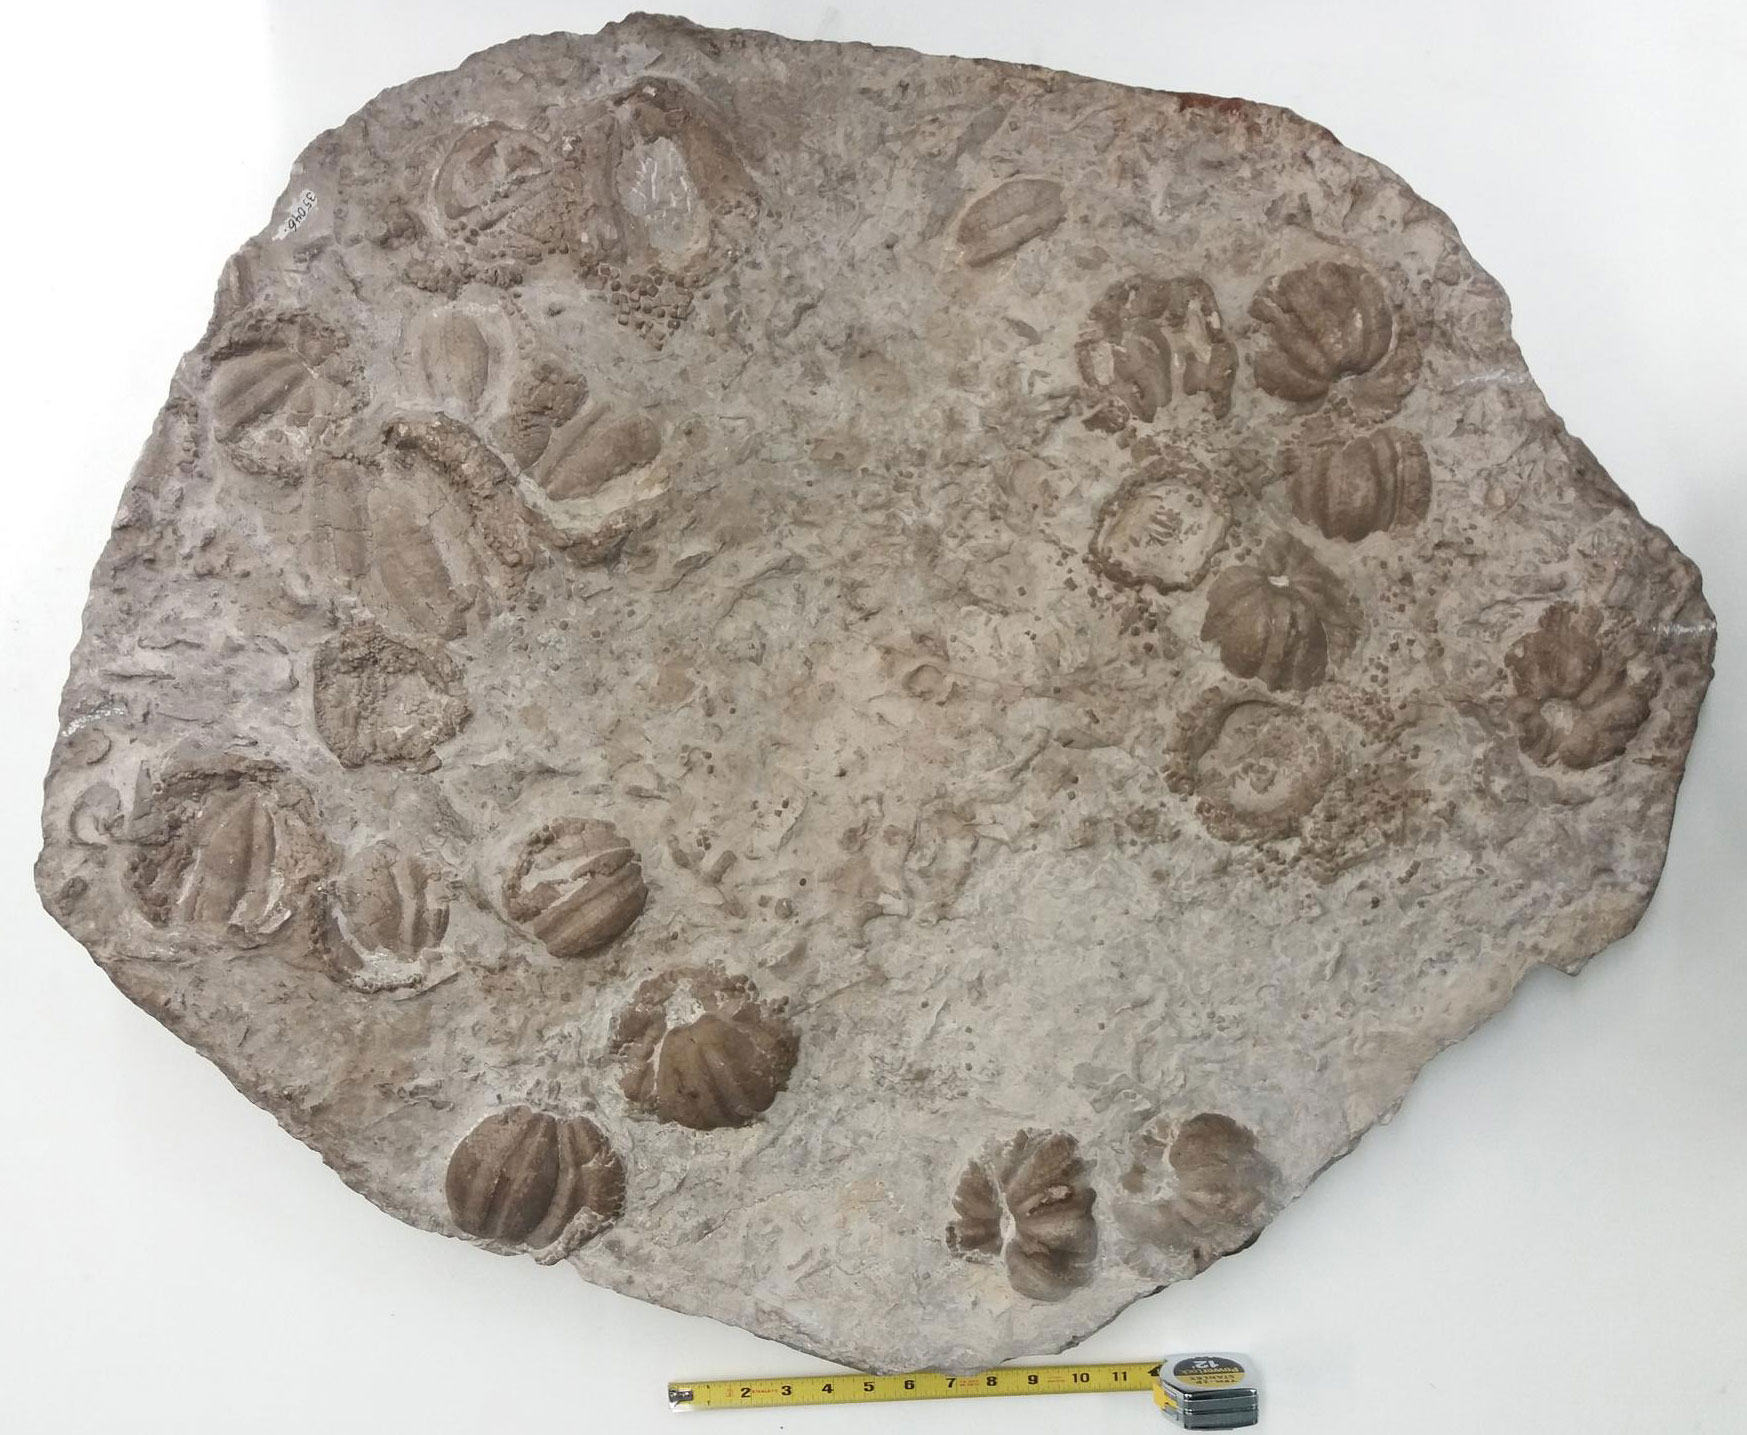 Photograph of a large slab of echinoid fossils from the Mississippian of Missouri.